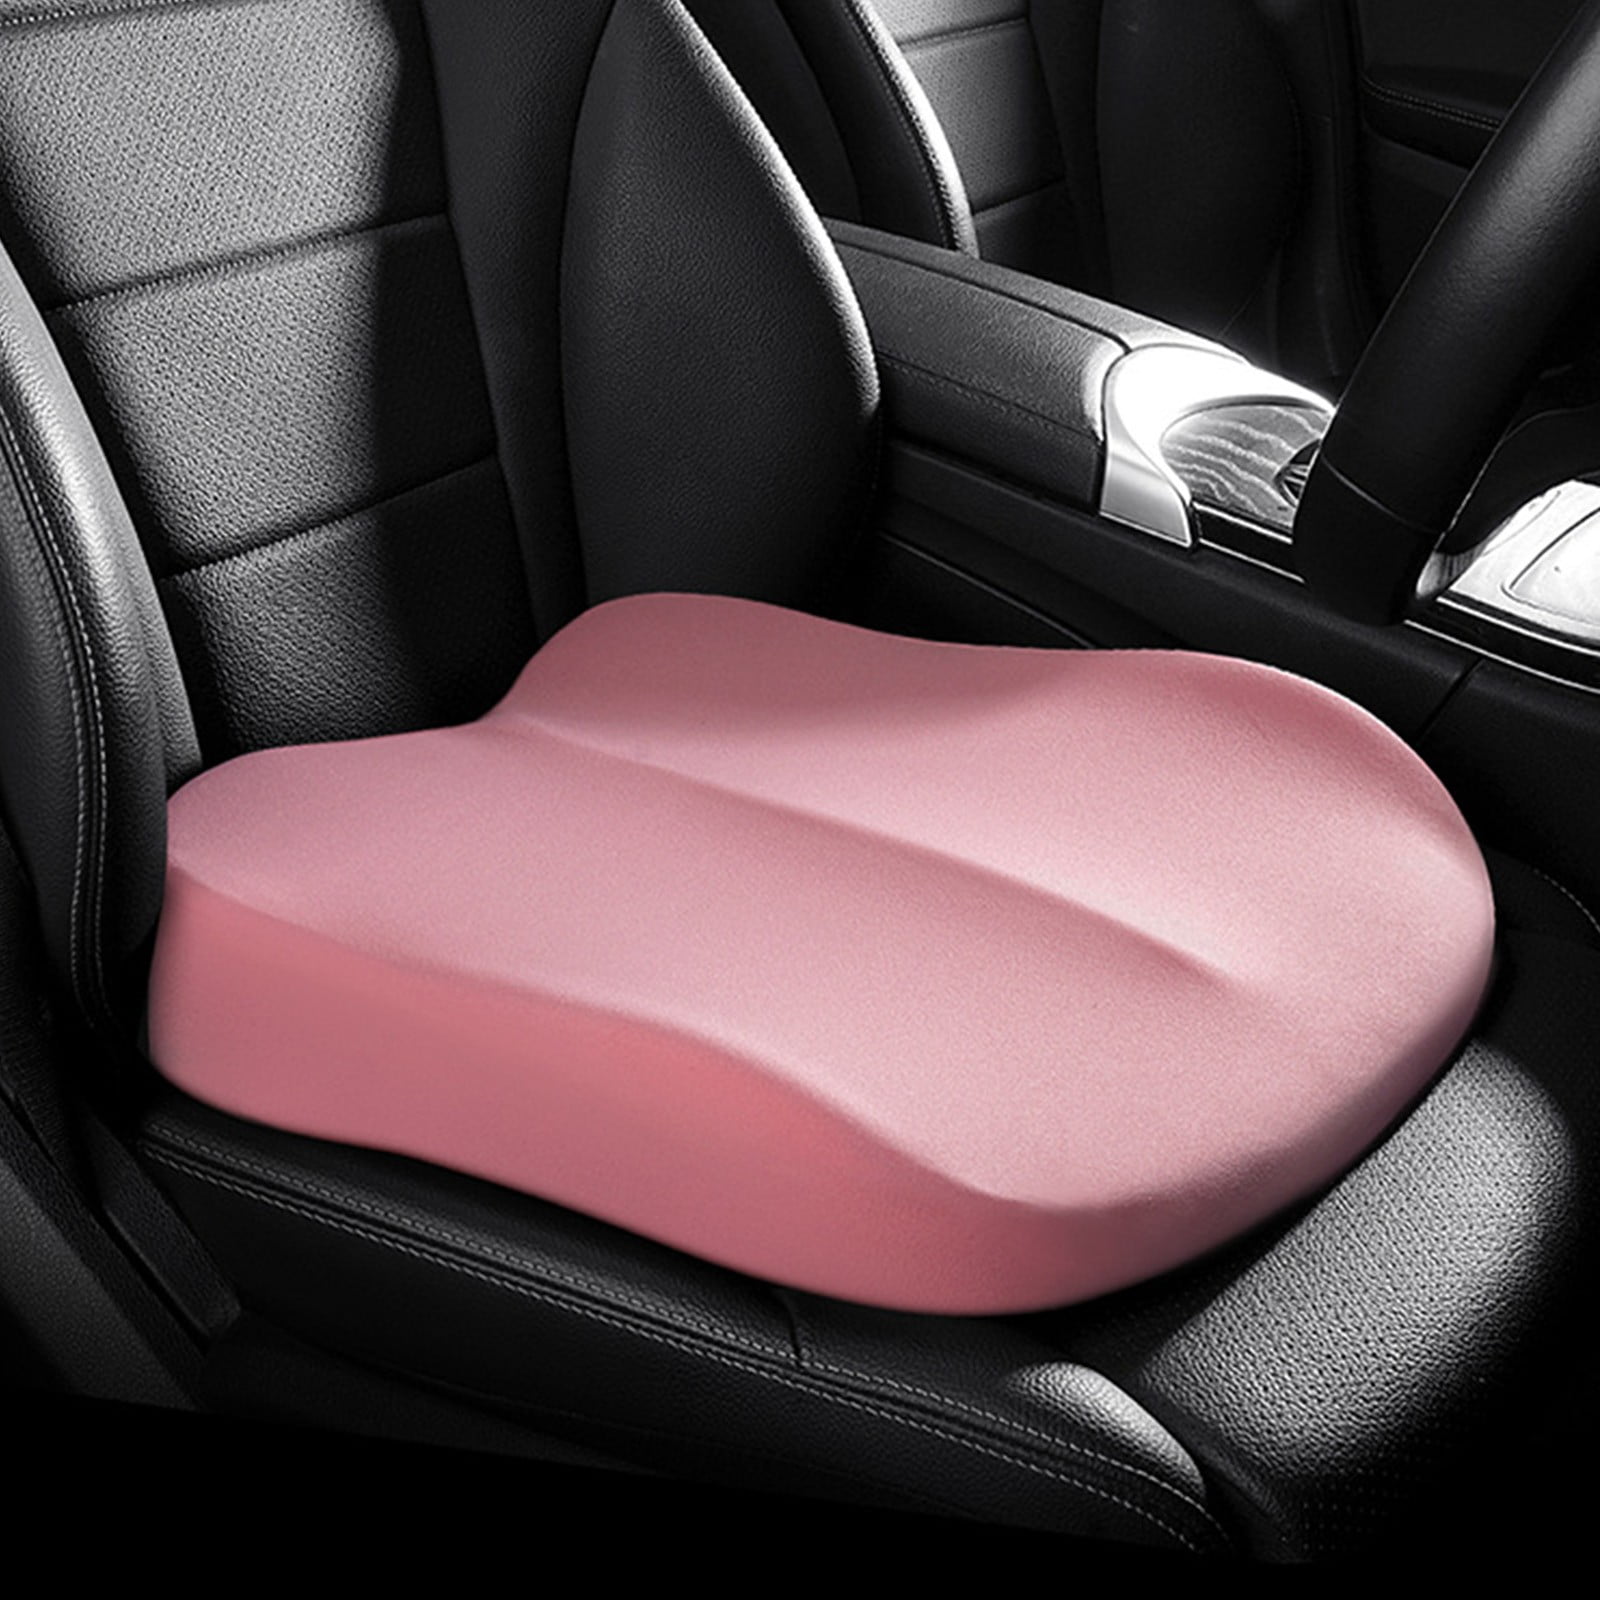 XEOVHVLJ Clearance Car Wedge Seat Cushion For Car Seat Driver/Passenger-  Wedge Car Seat Cushions For Driving Improve Vision/Posture - Memory Foam  Car Seat Cushion For Hip Pain 